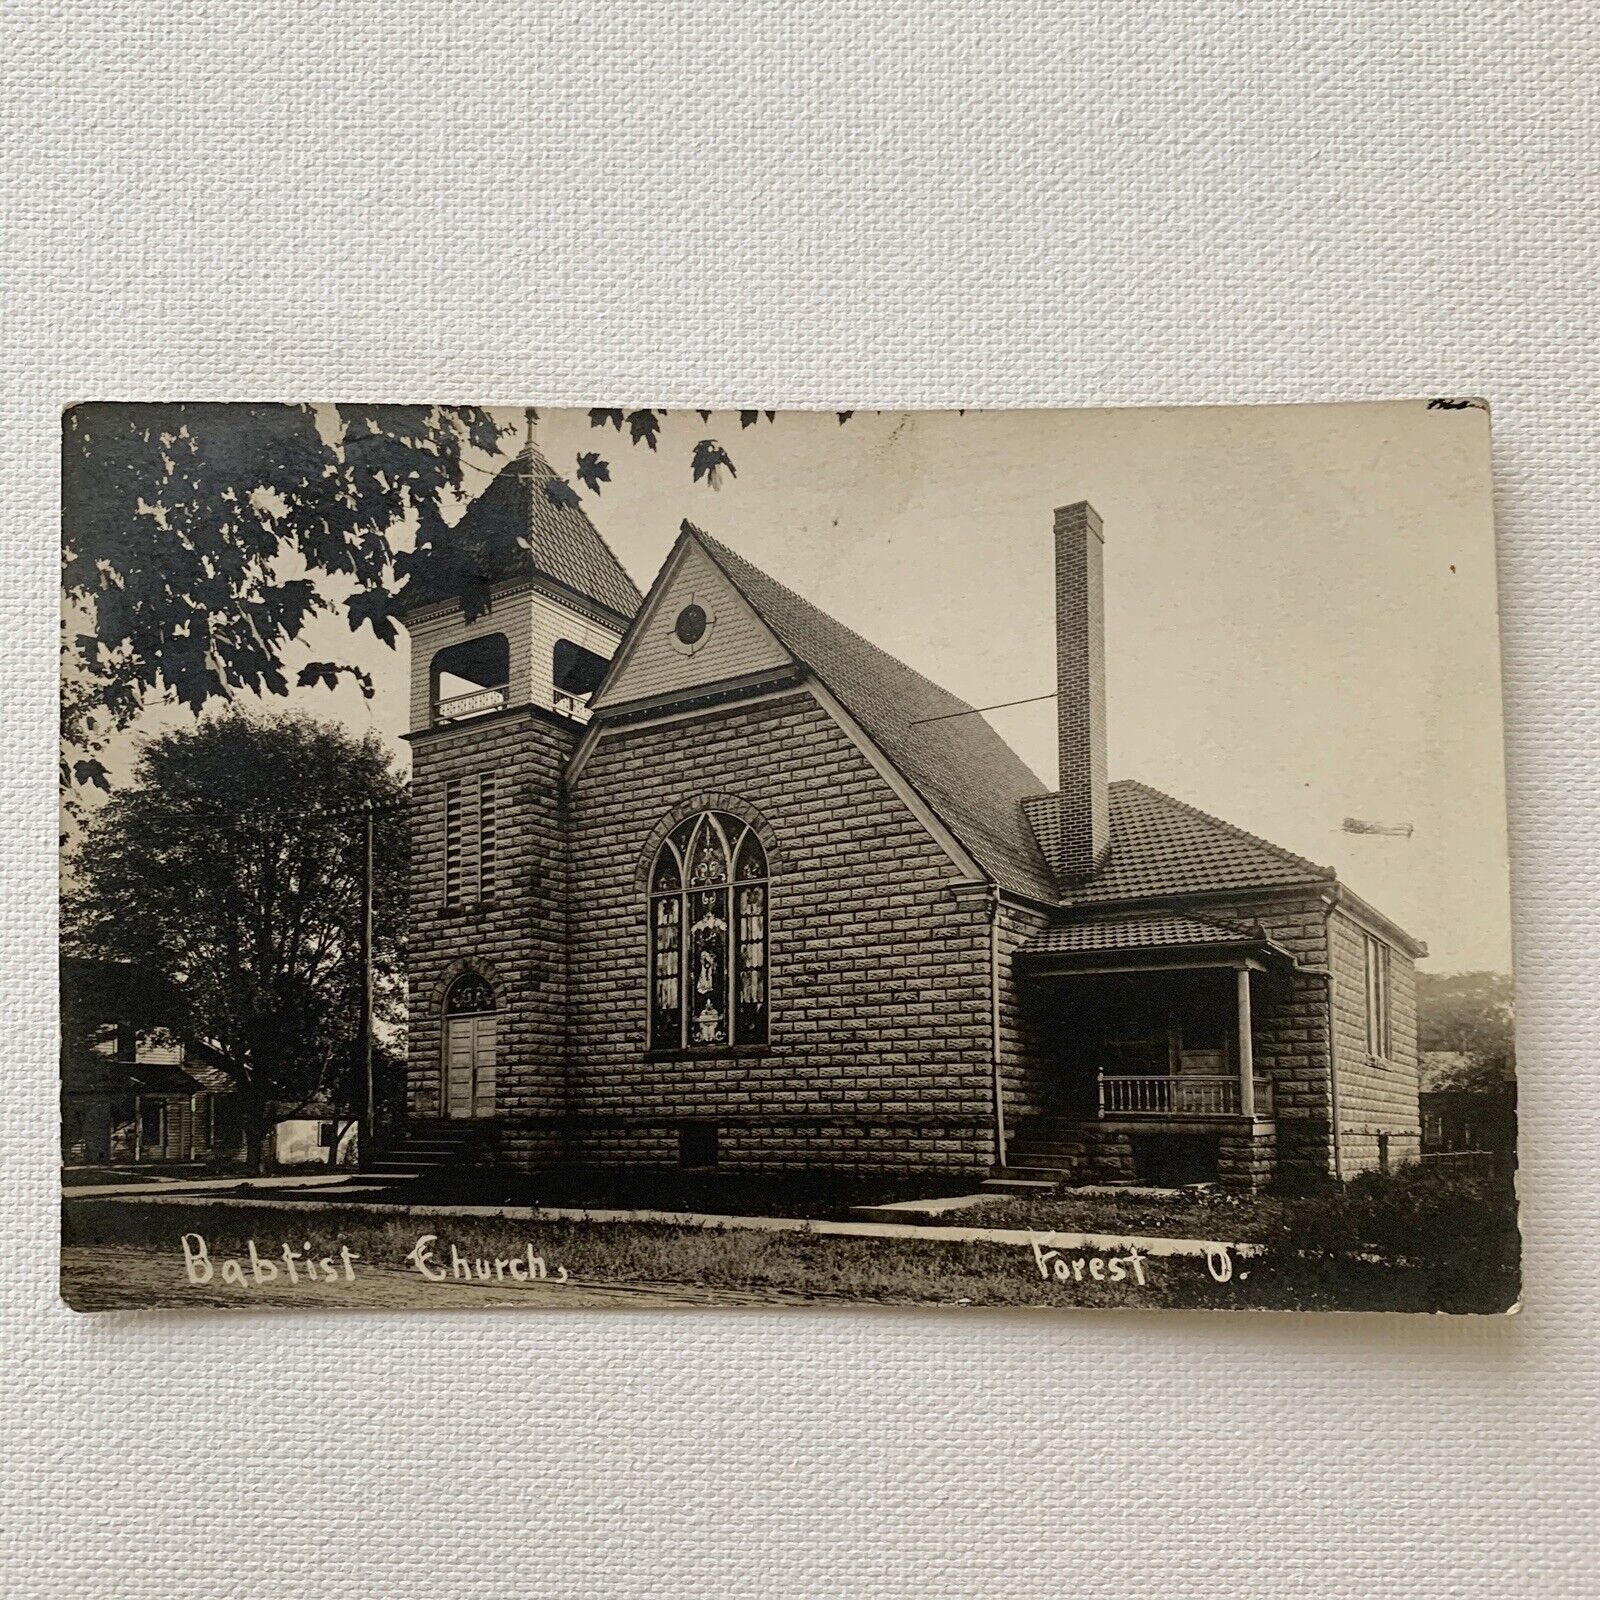 Antique RPPC Real Photograph Postcard First Baptist Church Forest Ohio Postmark